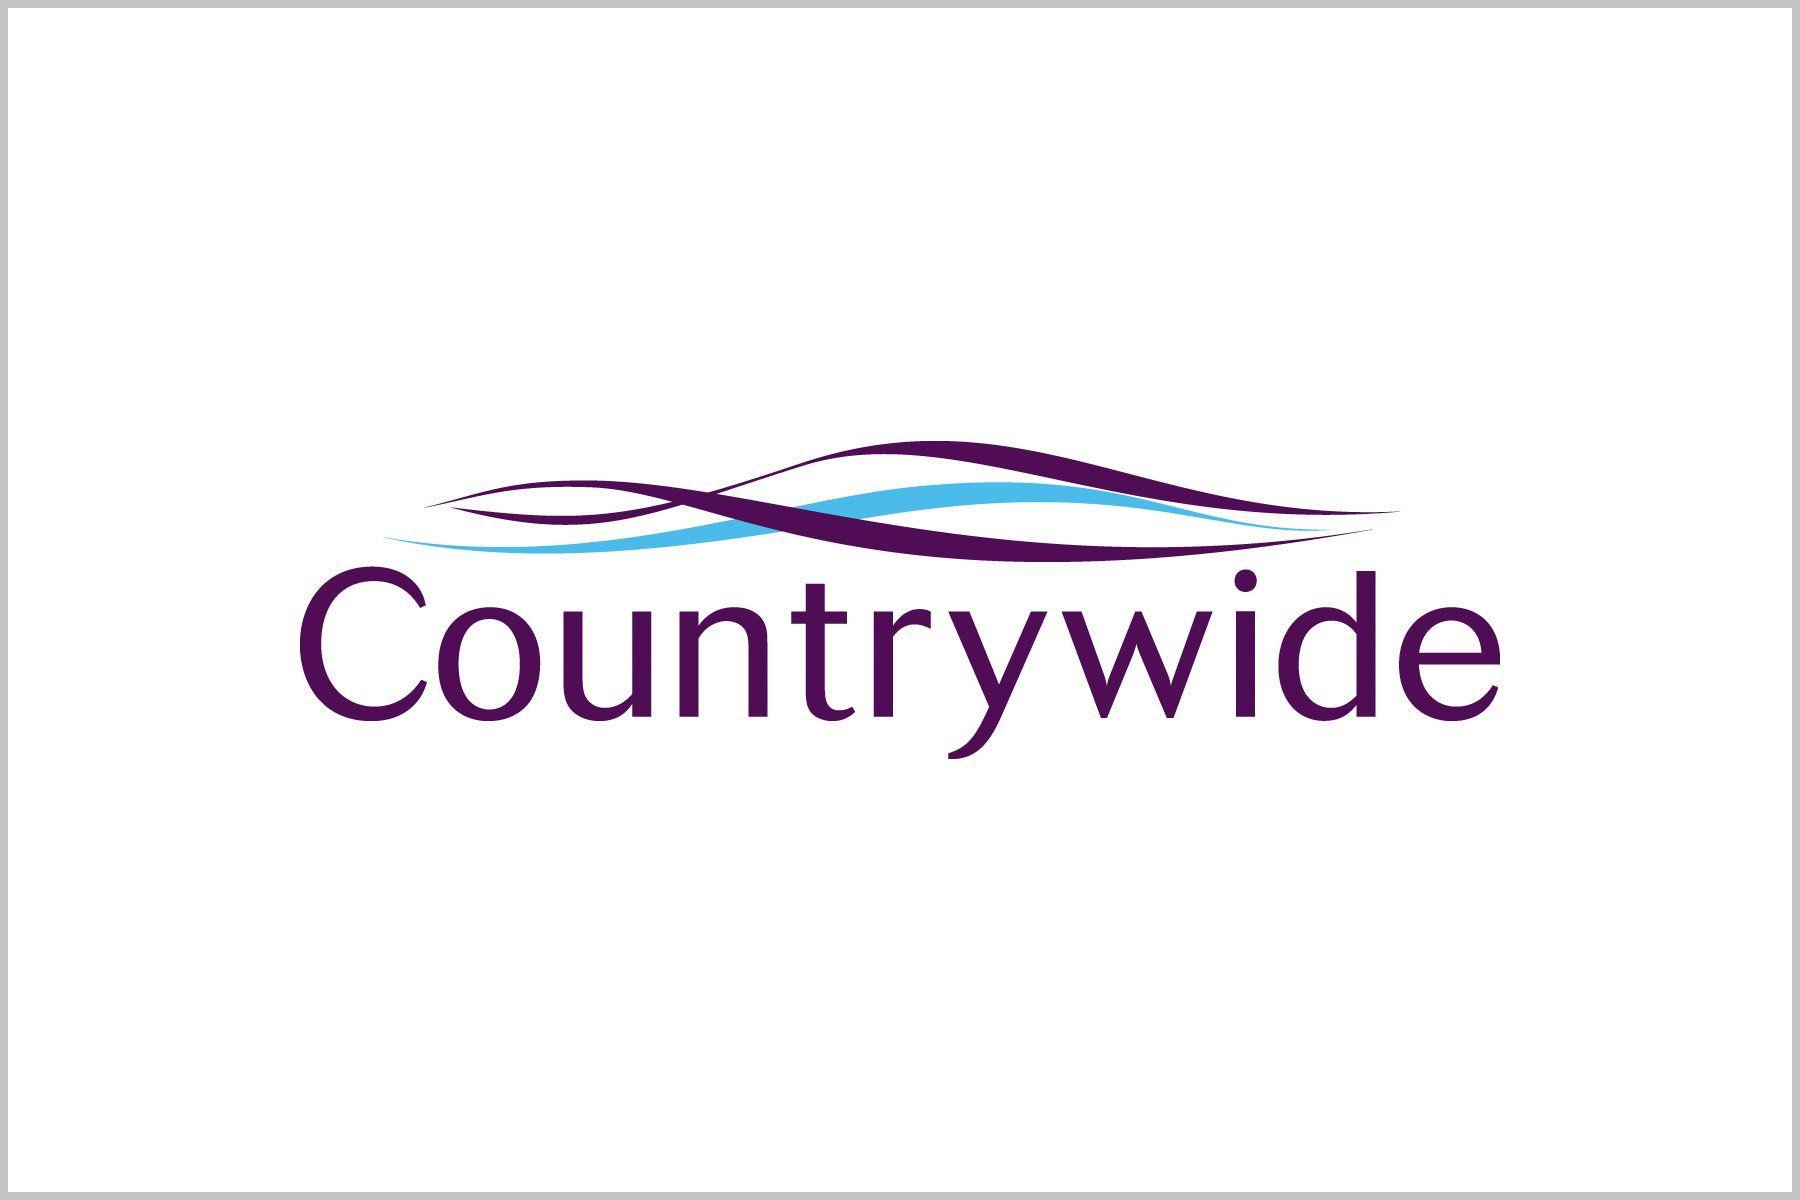 Countrywide Logo - Our brands | Countrywide Plc